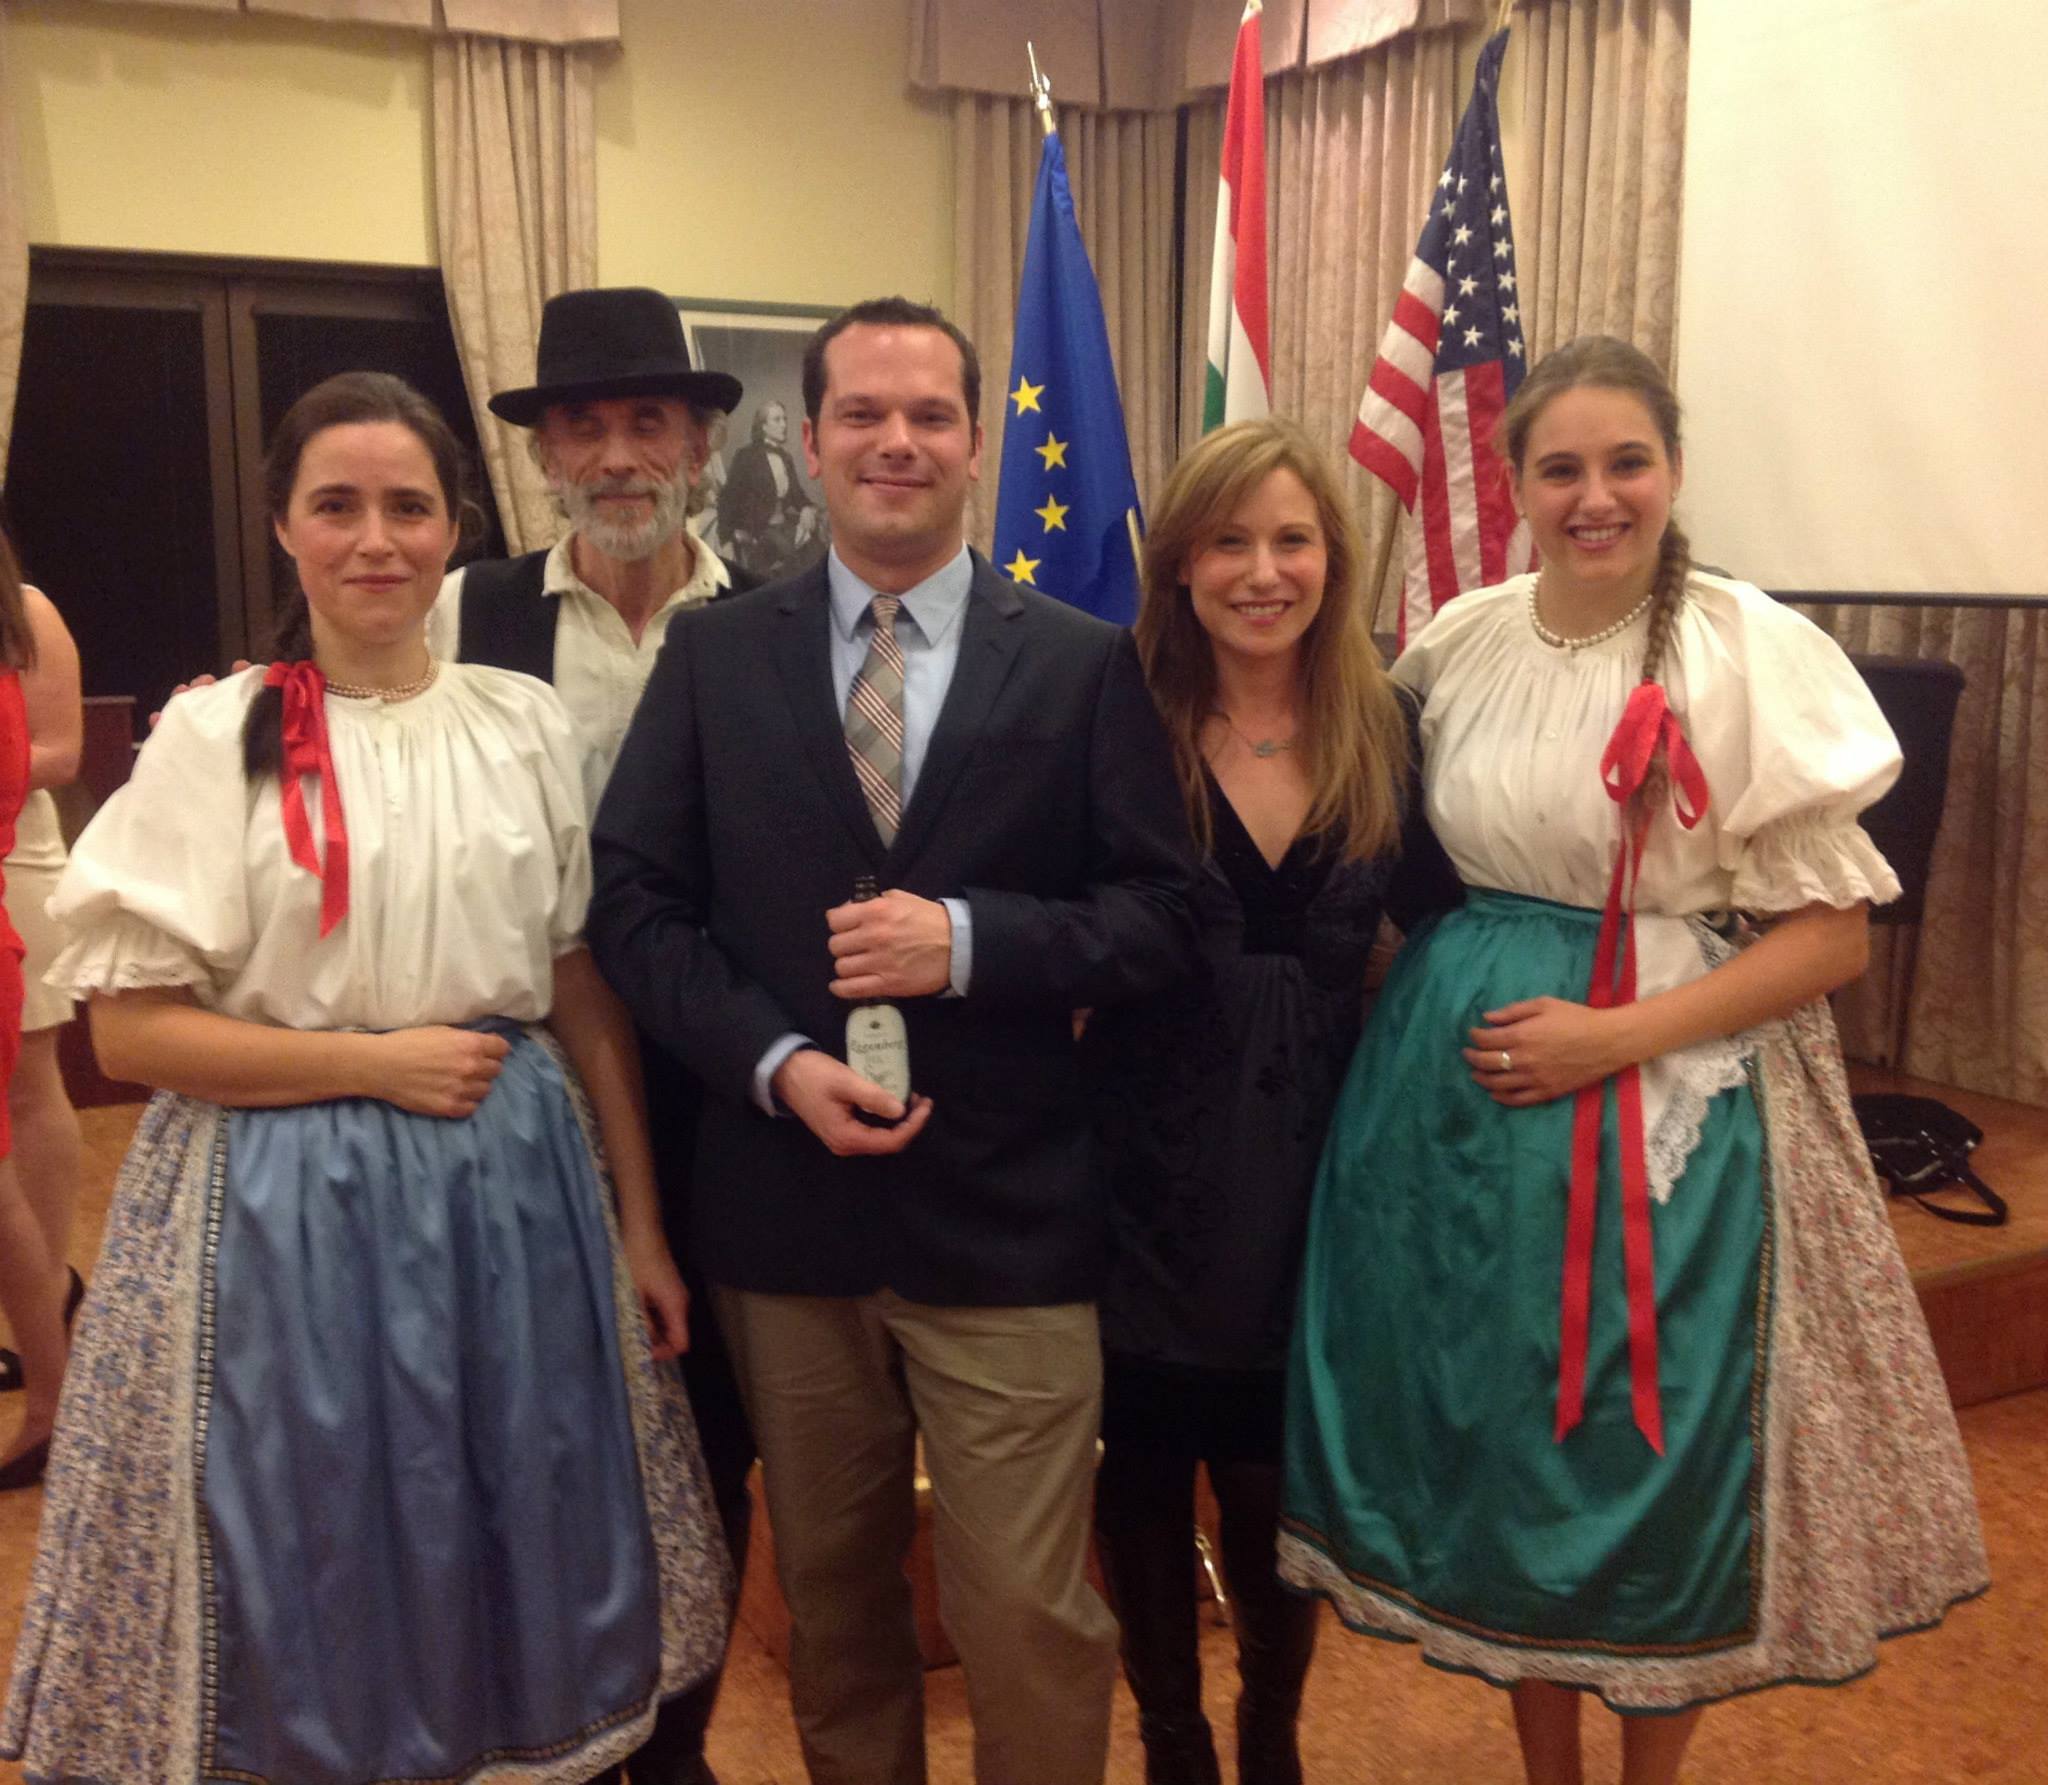 Evening at the Embassy of Hungary